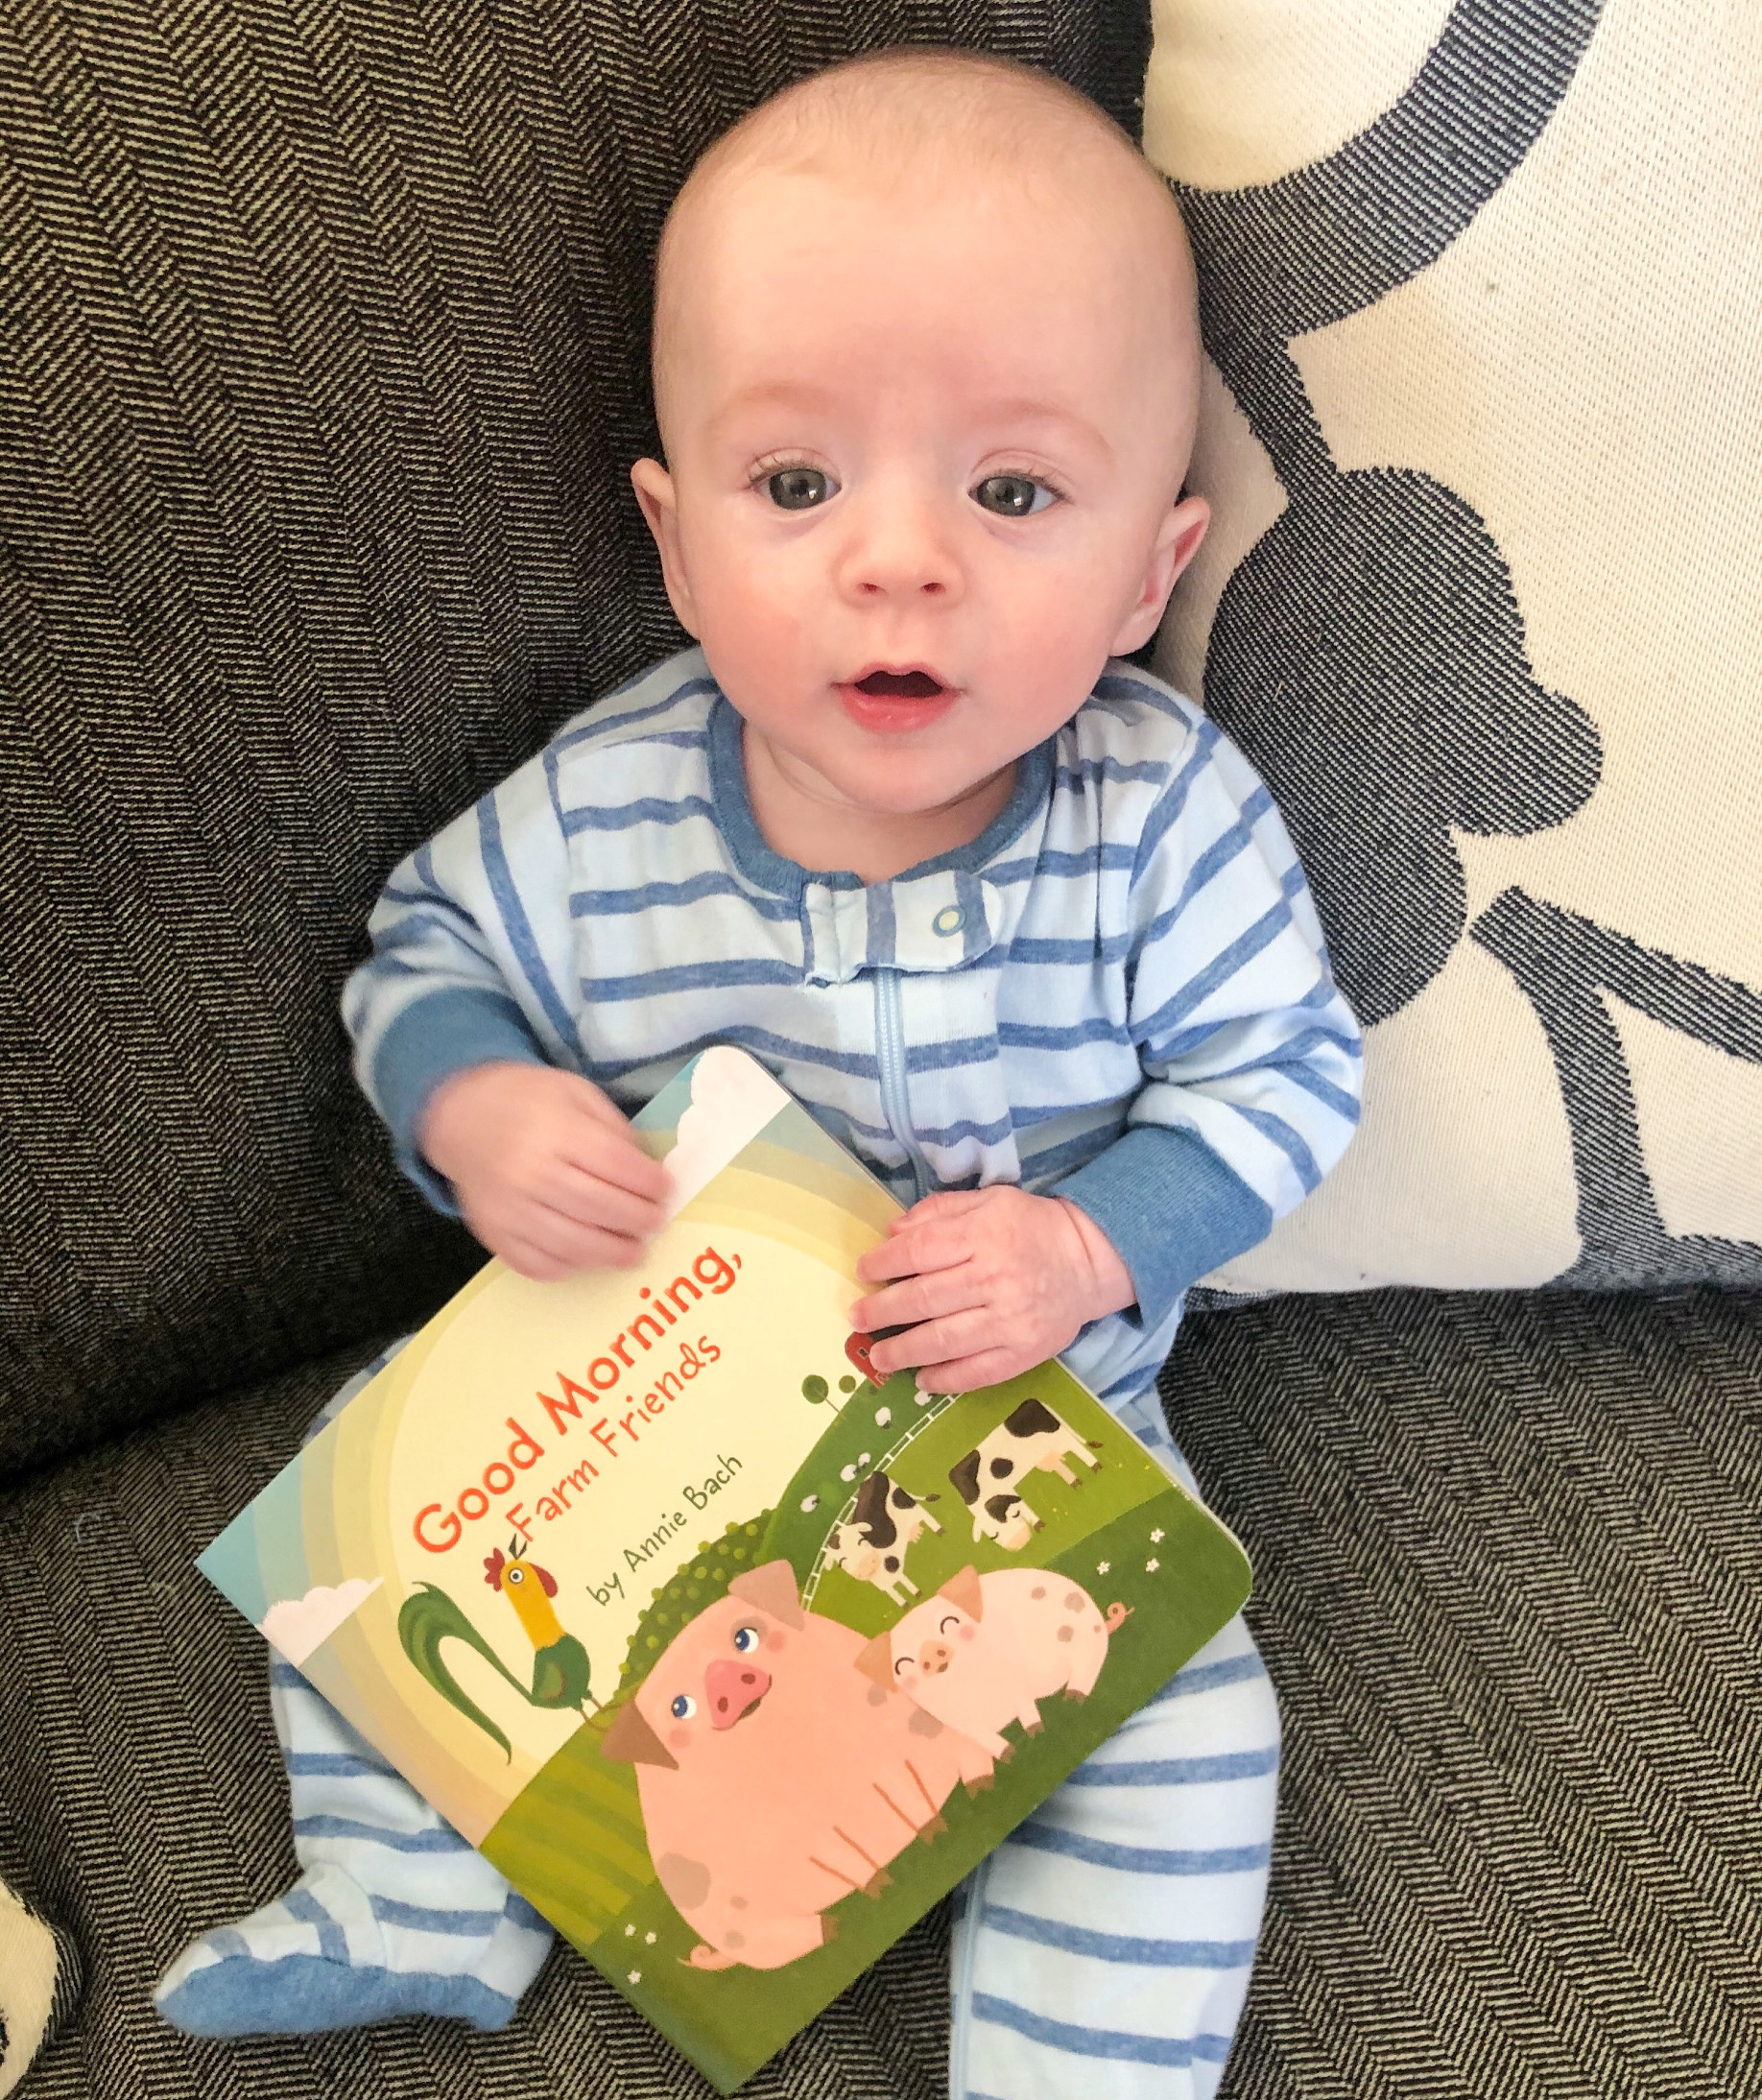 Lawson (5 months) holding Good Morning Farm Friends book. 